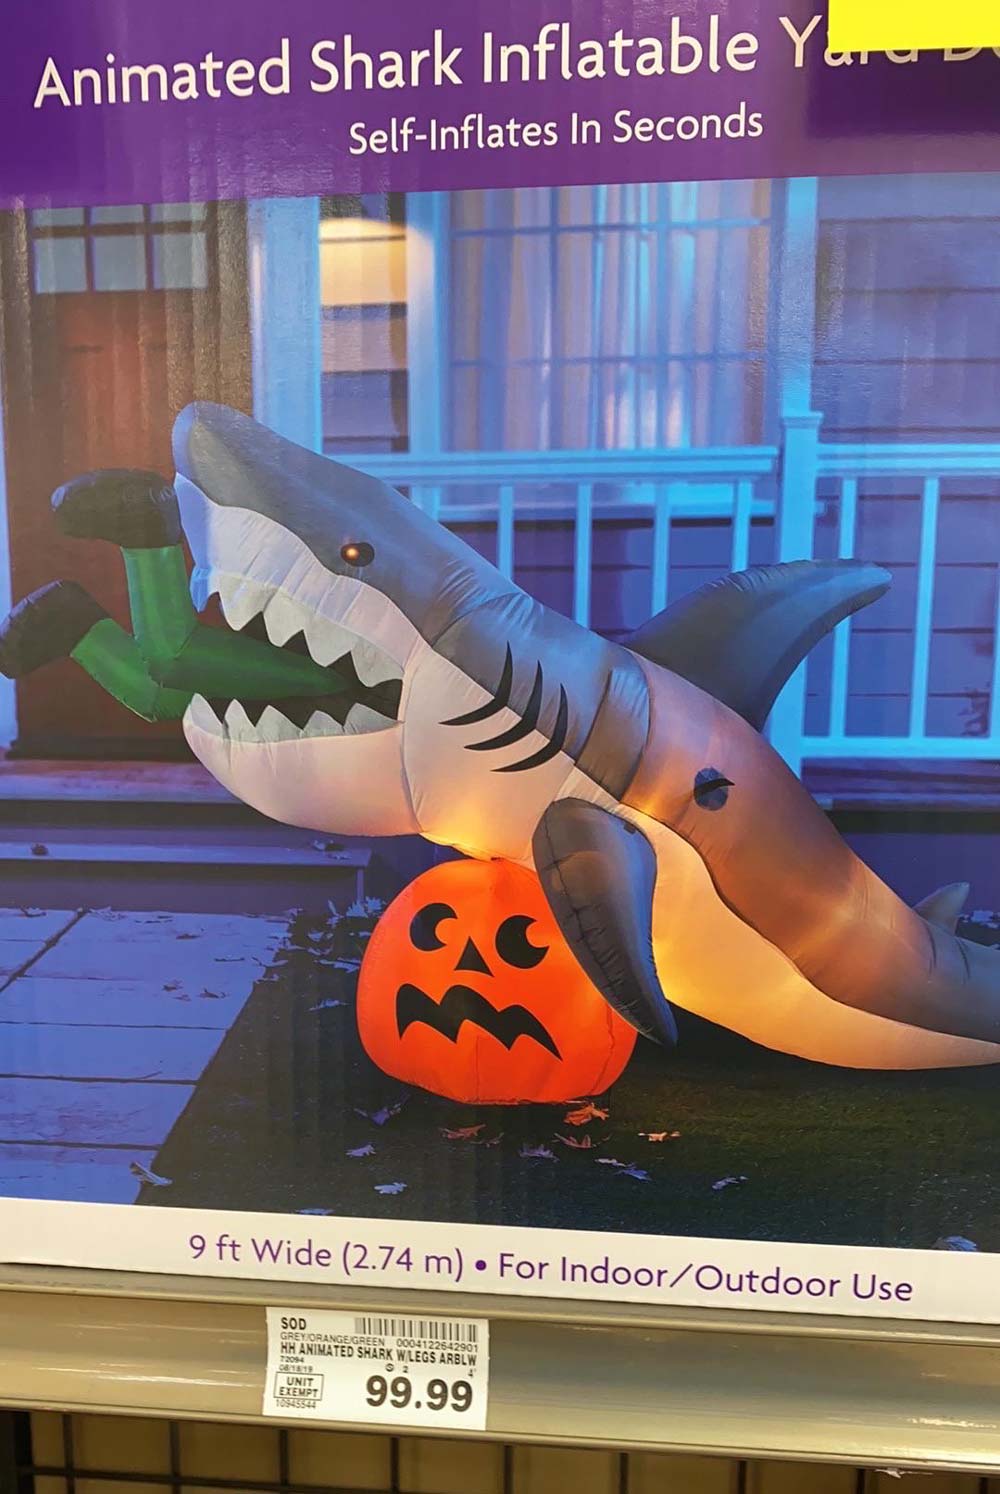 Ah yes, I’ve always wanted a blow up of a shark eating someone while humping a traumatized pumpkin